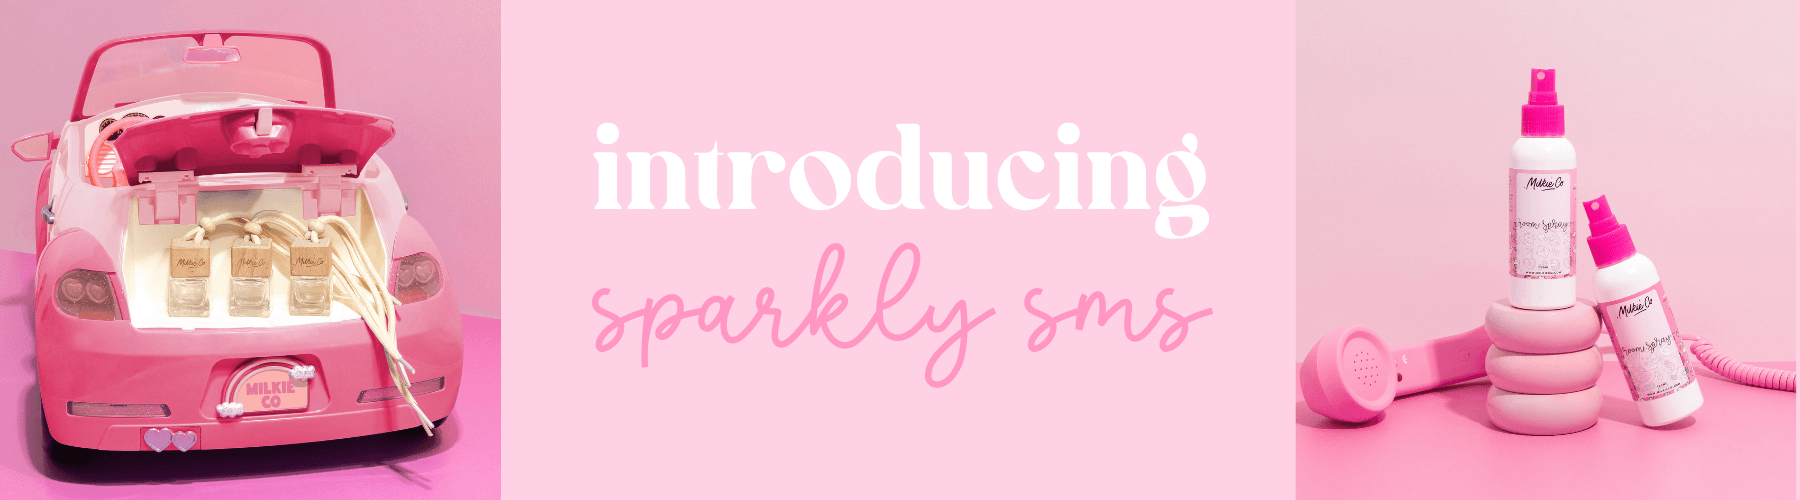 Introducing Milkie Co's ✨ SPARKLY SMS ✨ - Milkie Co